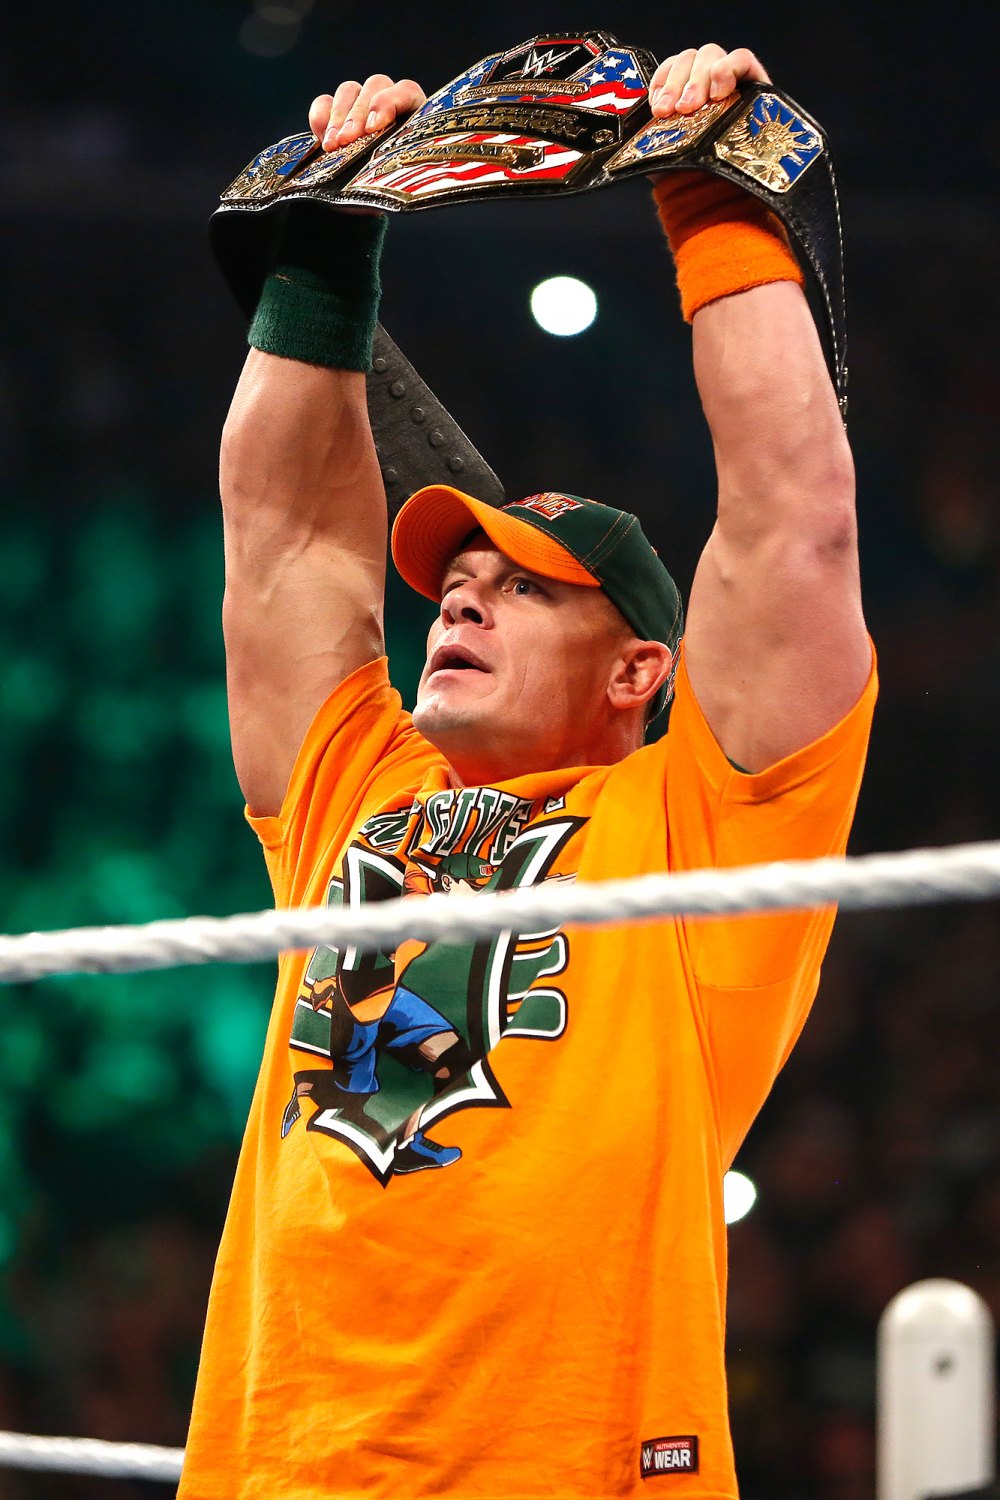 John Cena Says He Will Leave WWE When Actor’s Strike Ends: ‘You Can’t Do Both’